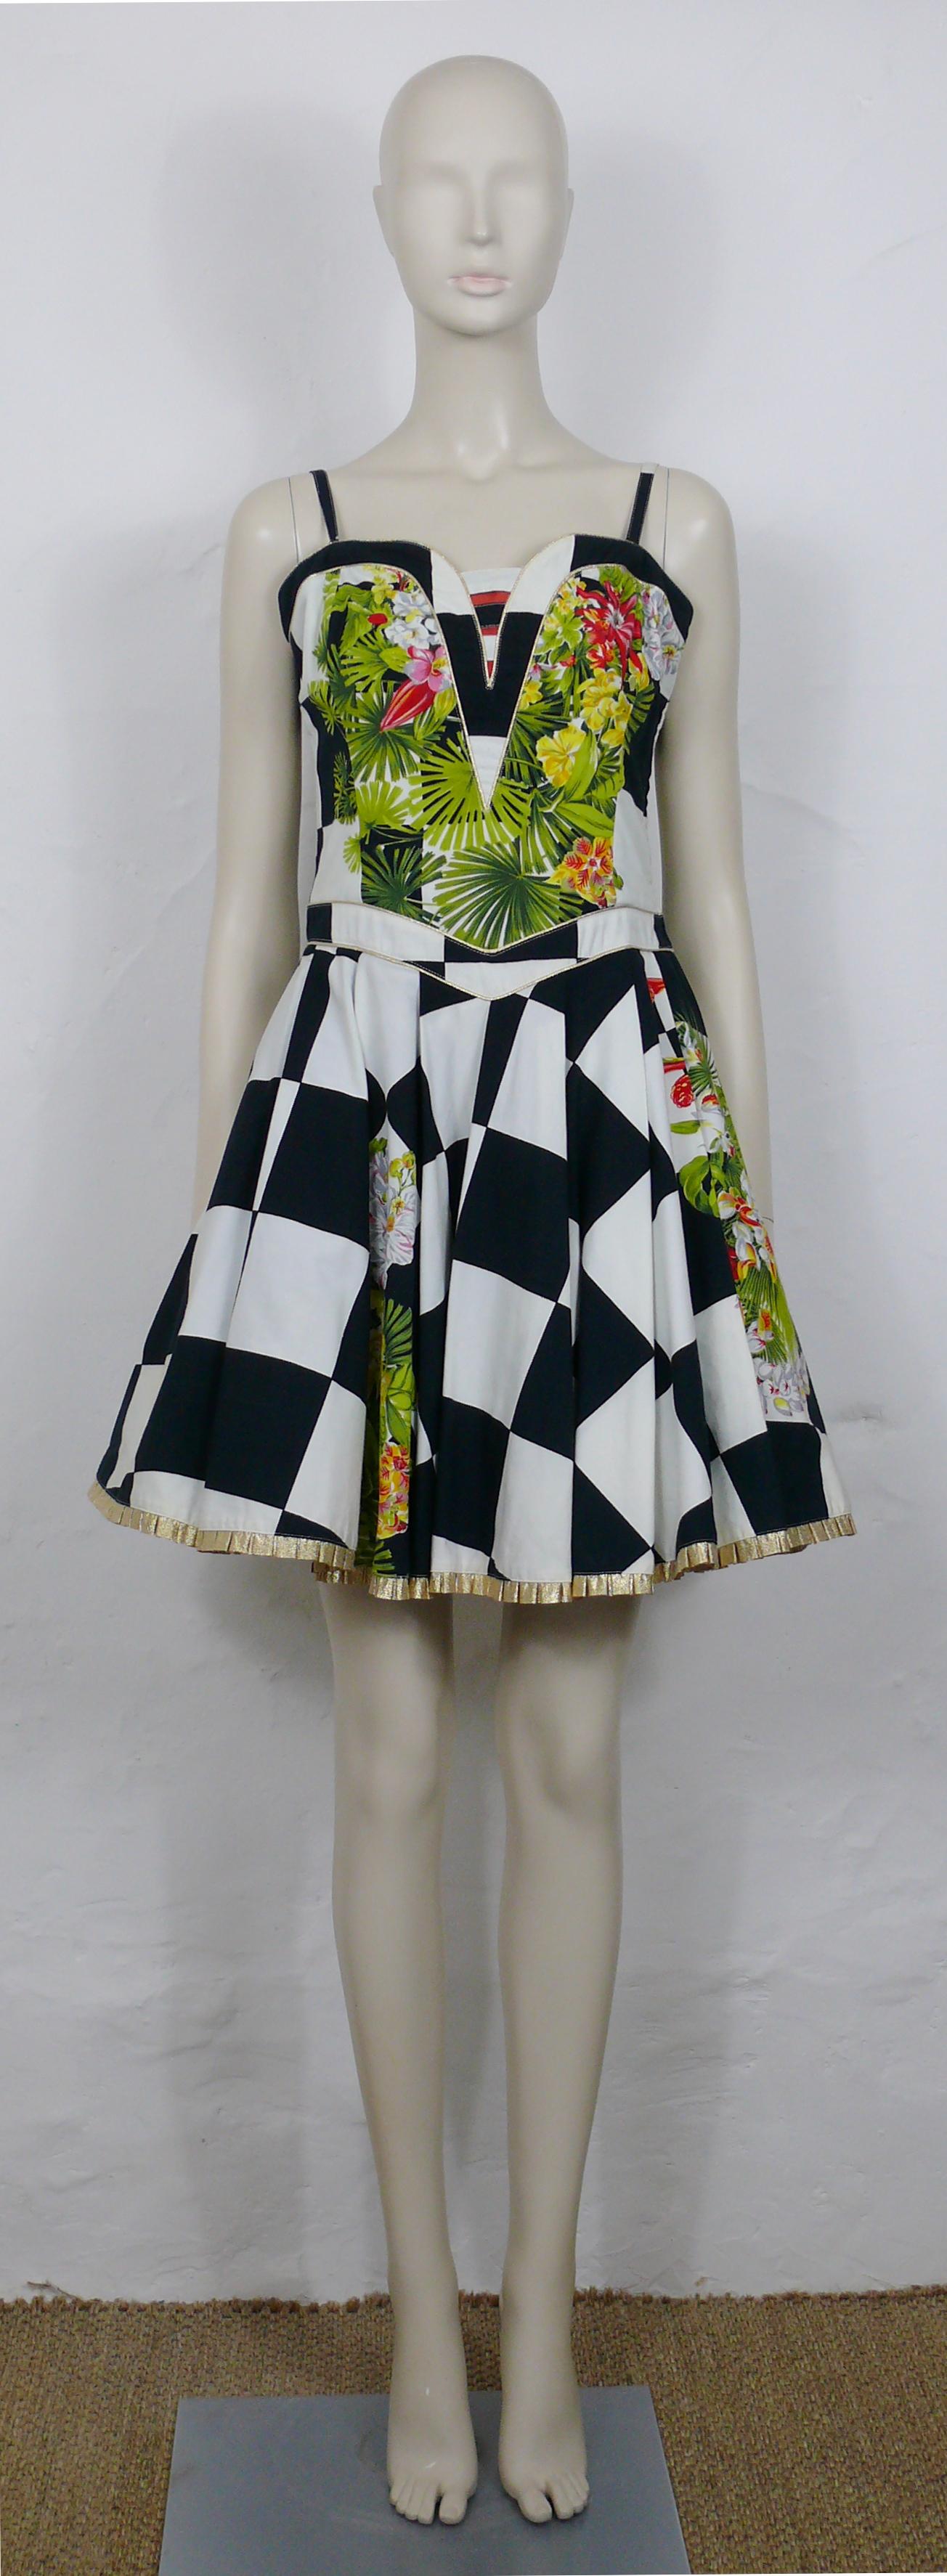 VERSACE JEANS COUTURE 1990s chess and tropical flowers print dress from GIANNI VERSACE era.

This dress features : 
- Black and off-white chess and tropical flowers print.
- White tulle petticoat.
- Gold edging trim.
- Detachable straps (on/off